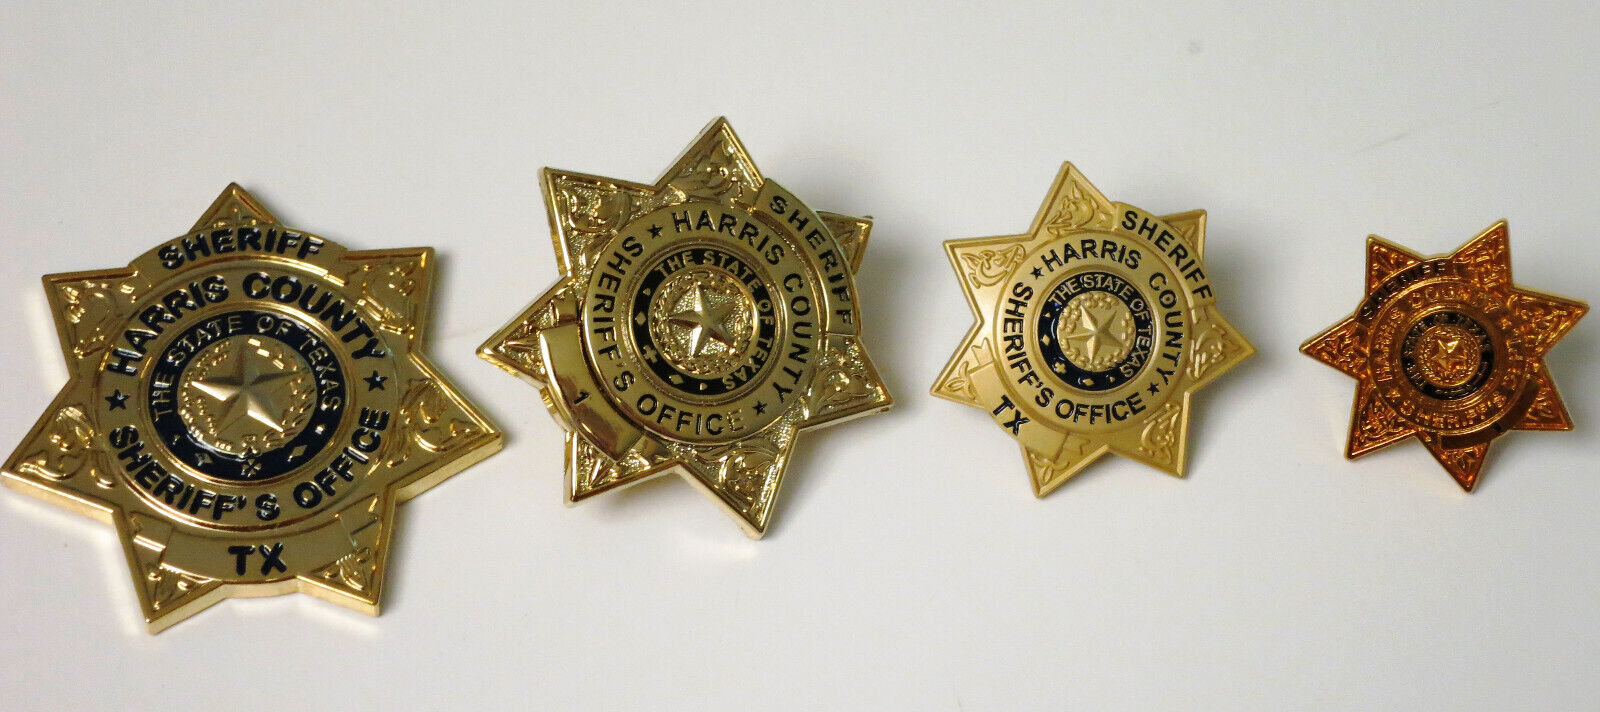 Harris County TX Sheriff’s Office LOT OF 4 Assorted Size Mini Badge Lapel Pins